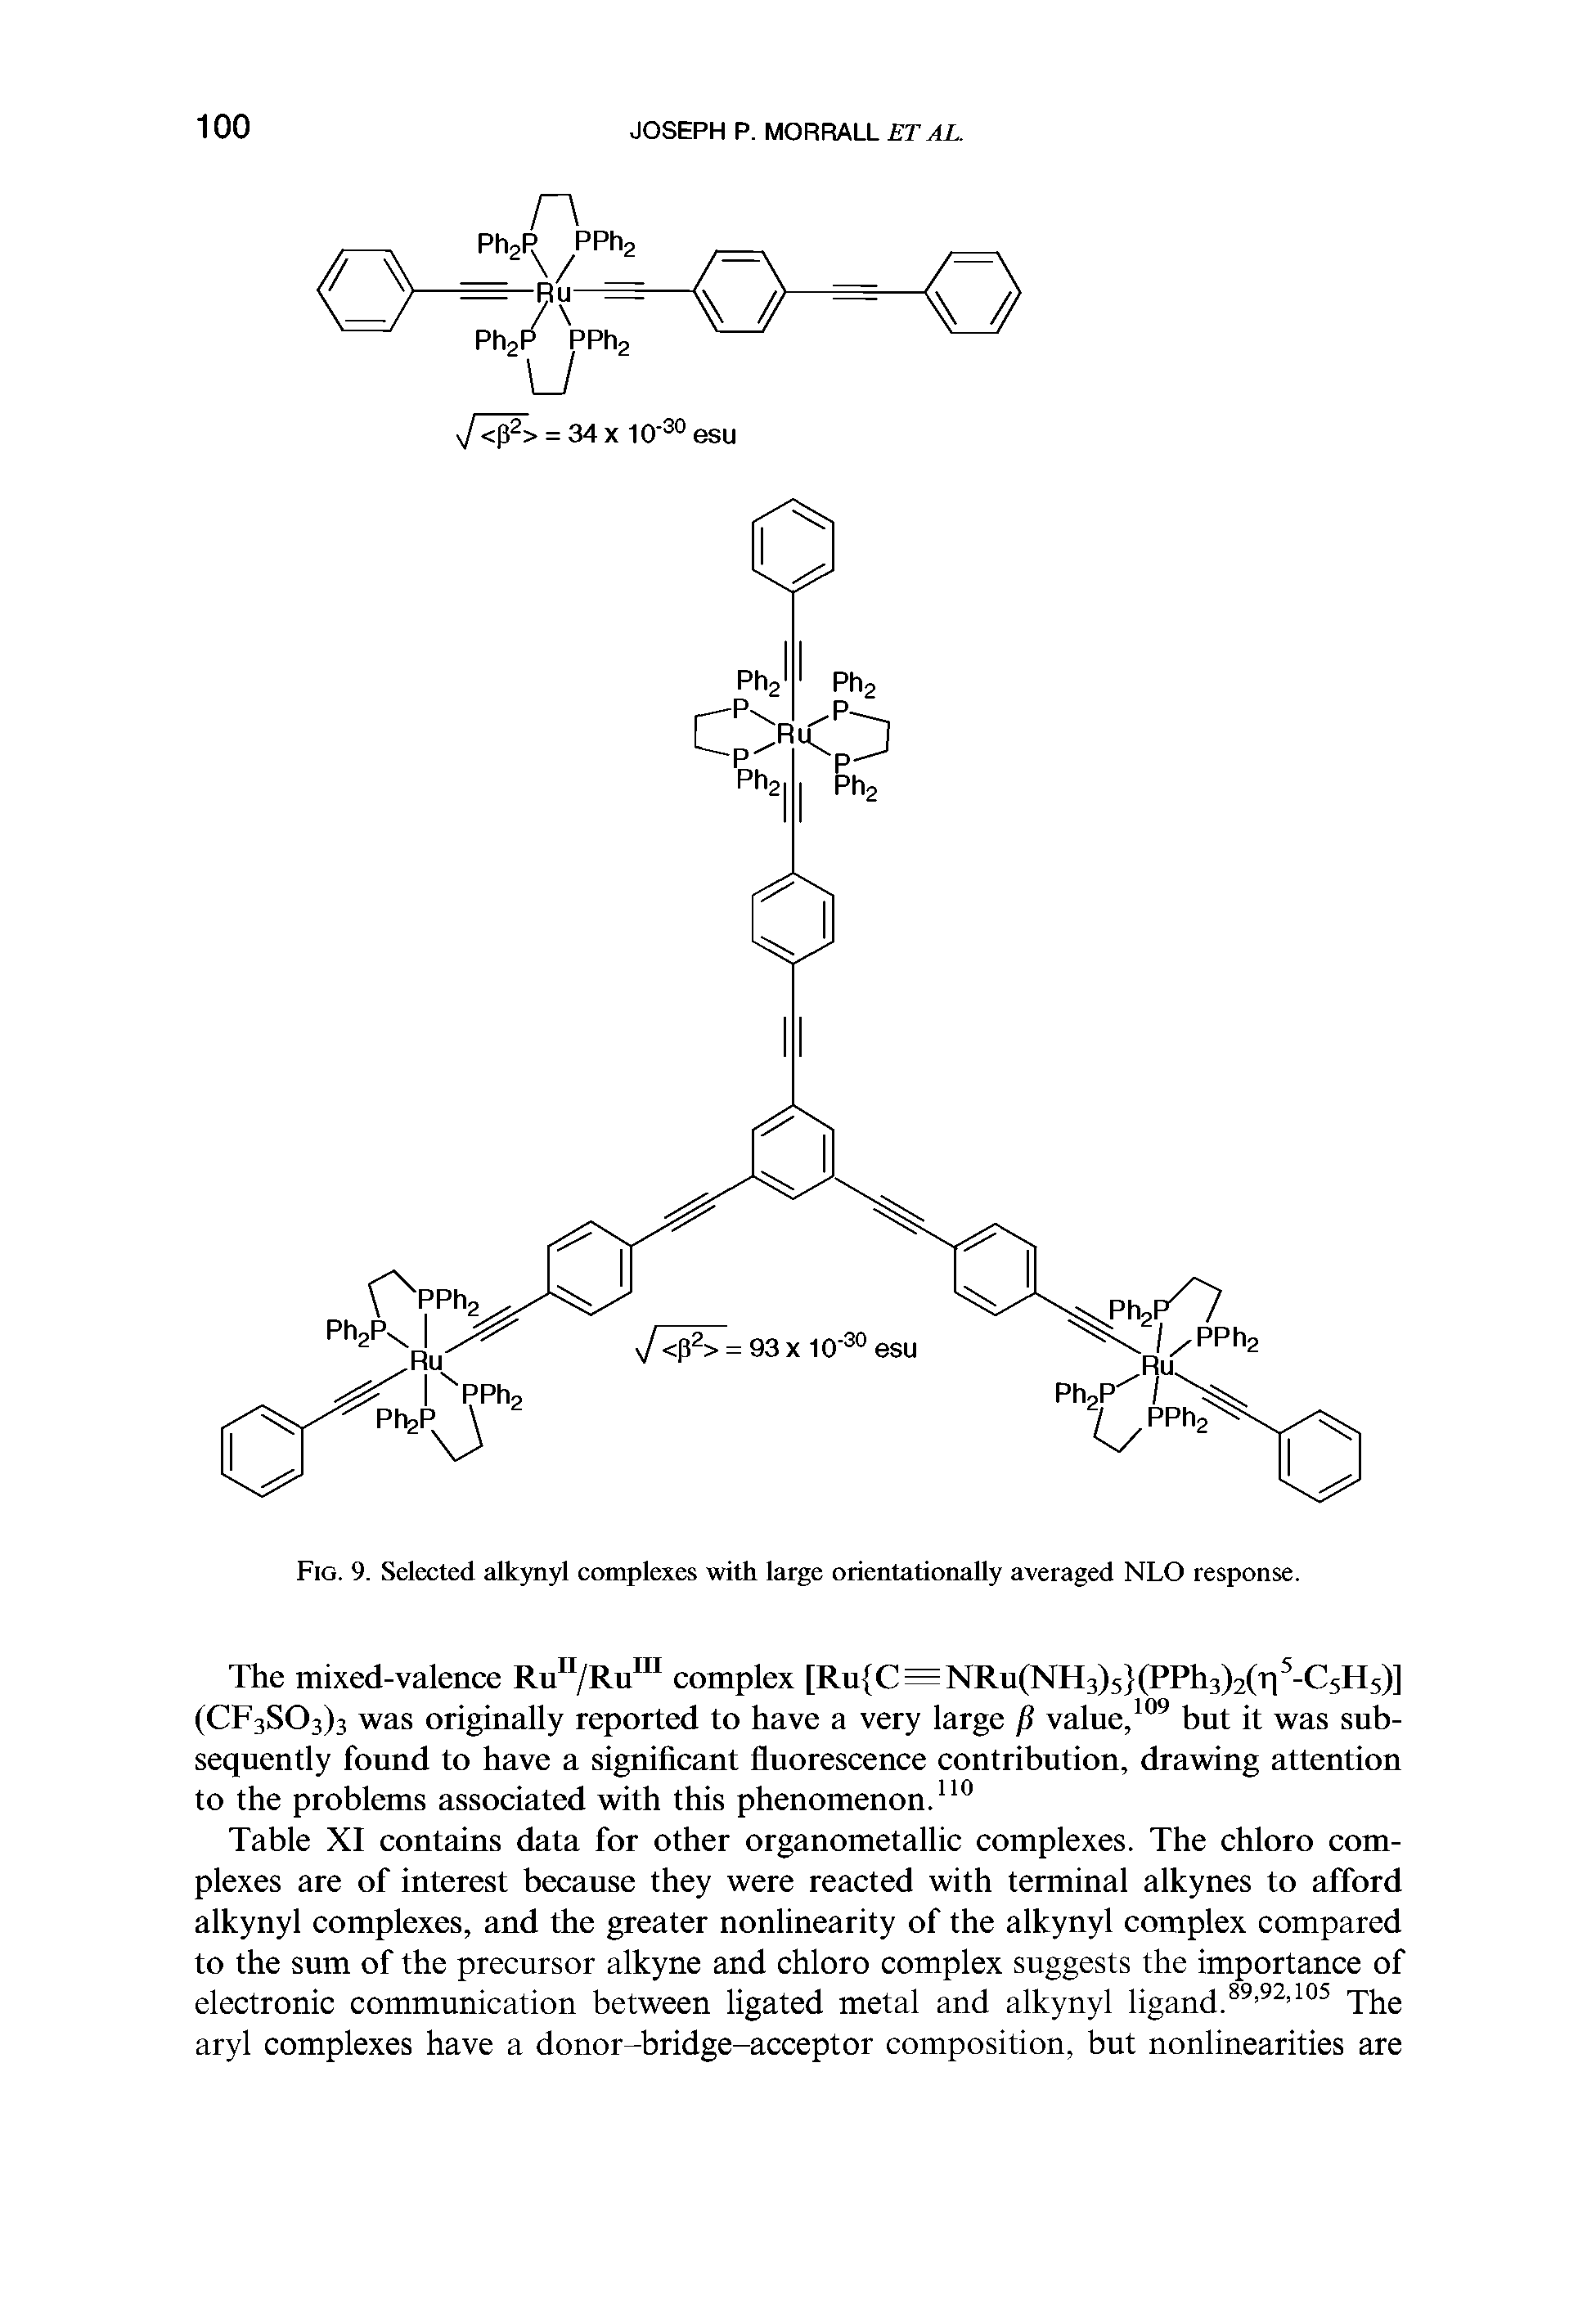 Table XI contains data for other organometallic complexes. The chloro complexes are of interest because they were reacted with terminal alkynes to afford alkynyl complexes, and the greater nonlinearity of the alkynyl complex eompared to the sum of the precursor alkyne and chloro complex suggests the importance of electronic communication between ligated metal and alkynyl ligand. The aryl complexes have a donor-bridge-acceptor composition, but nonlinearities are...